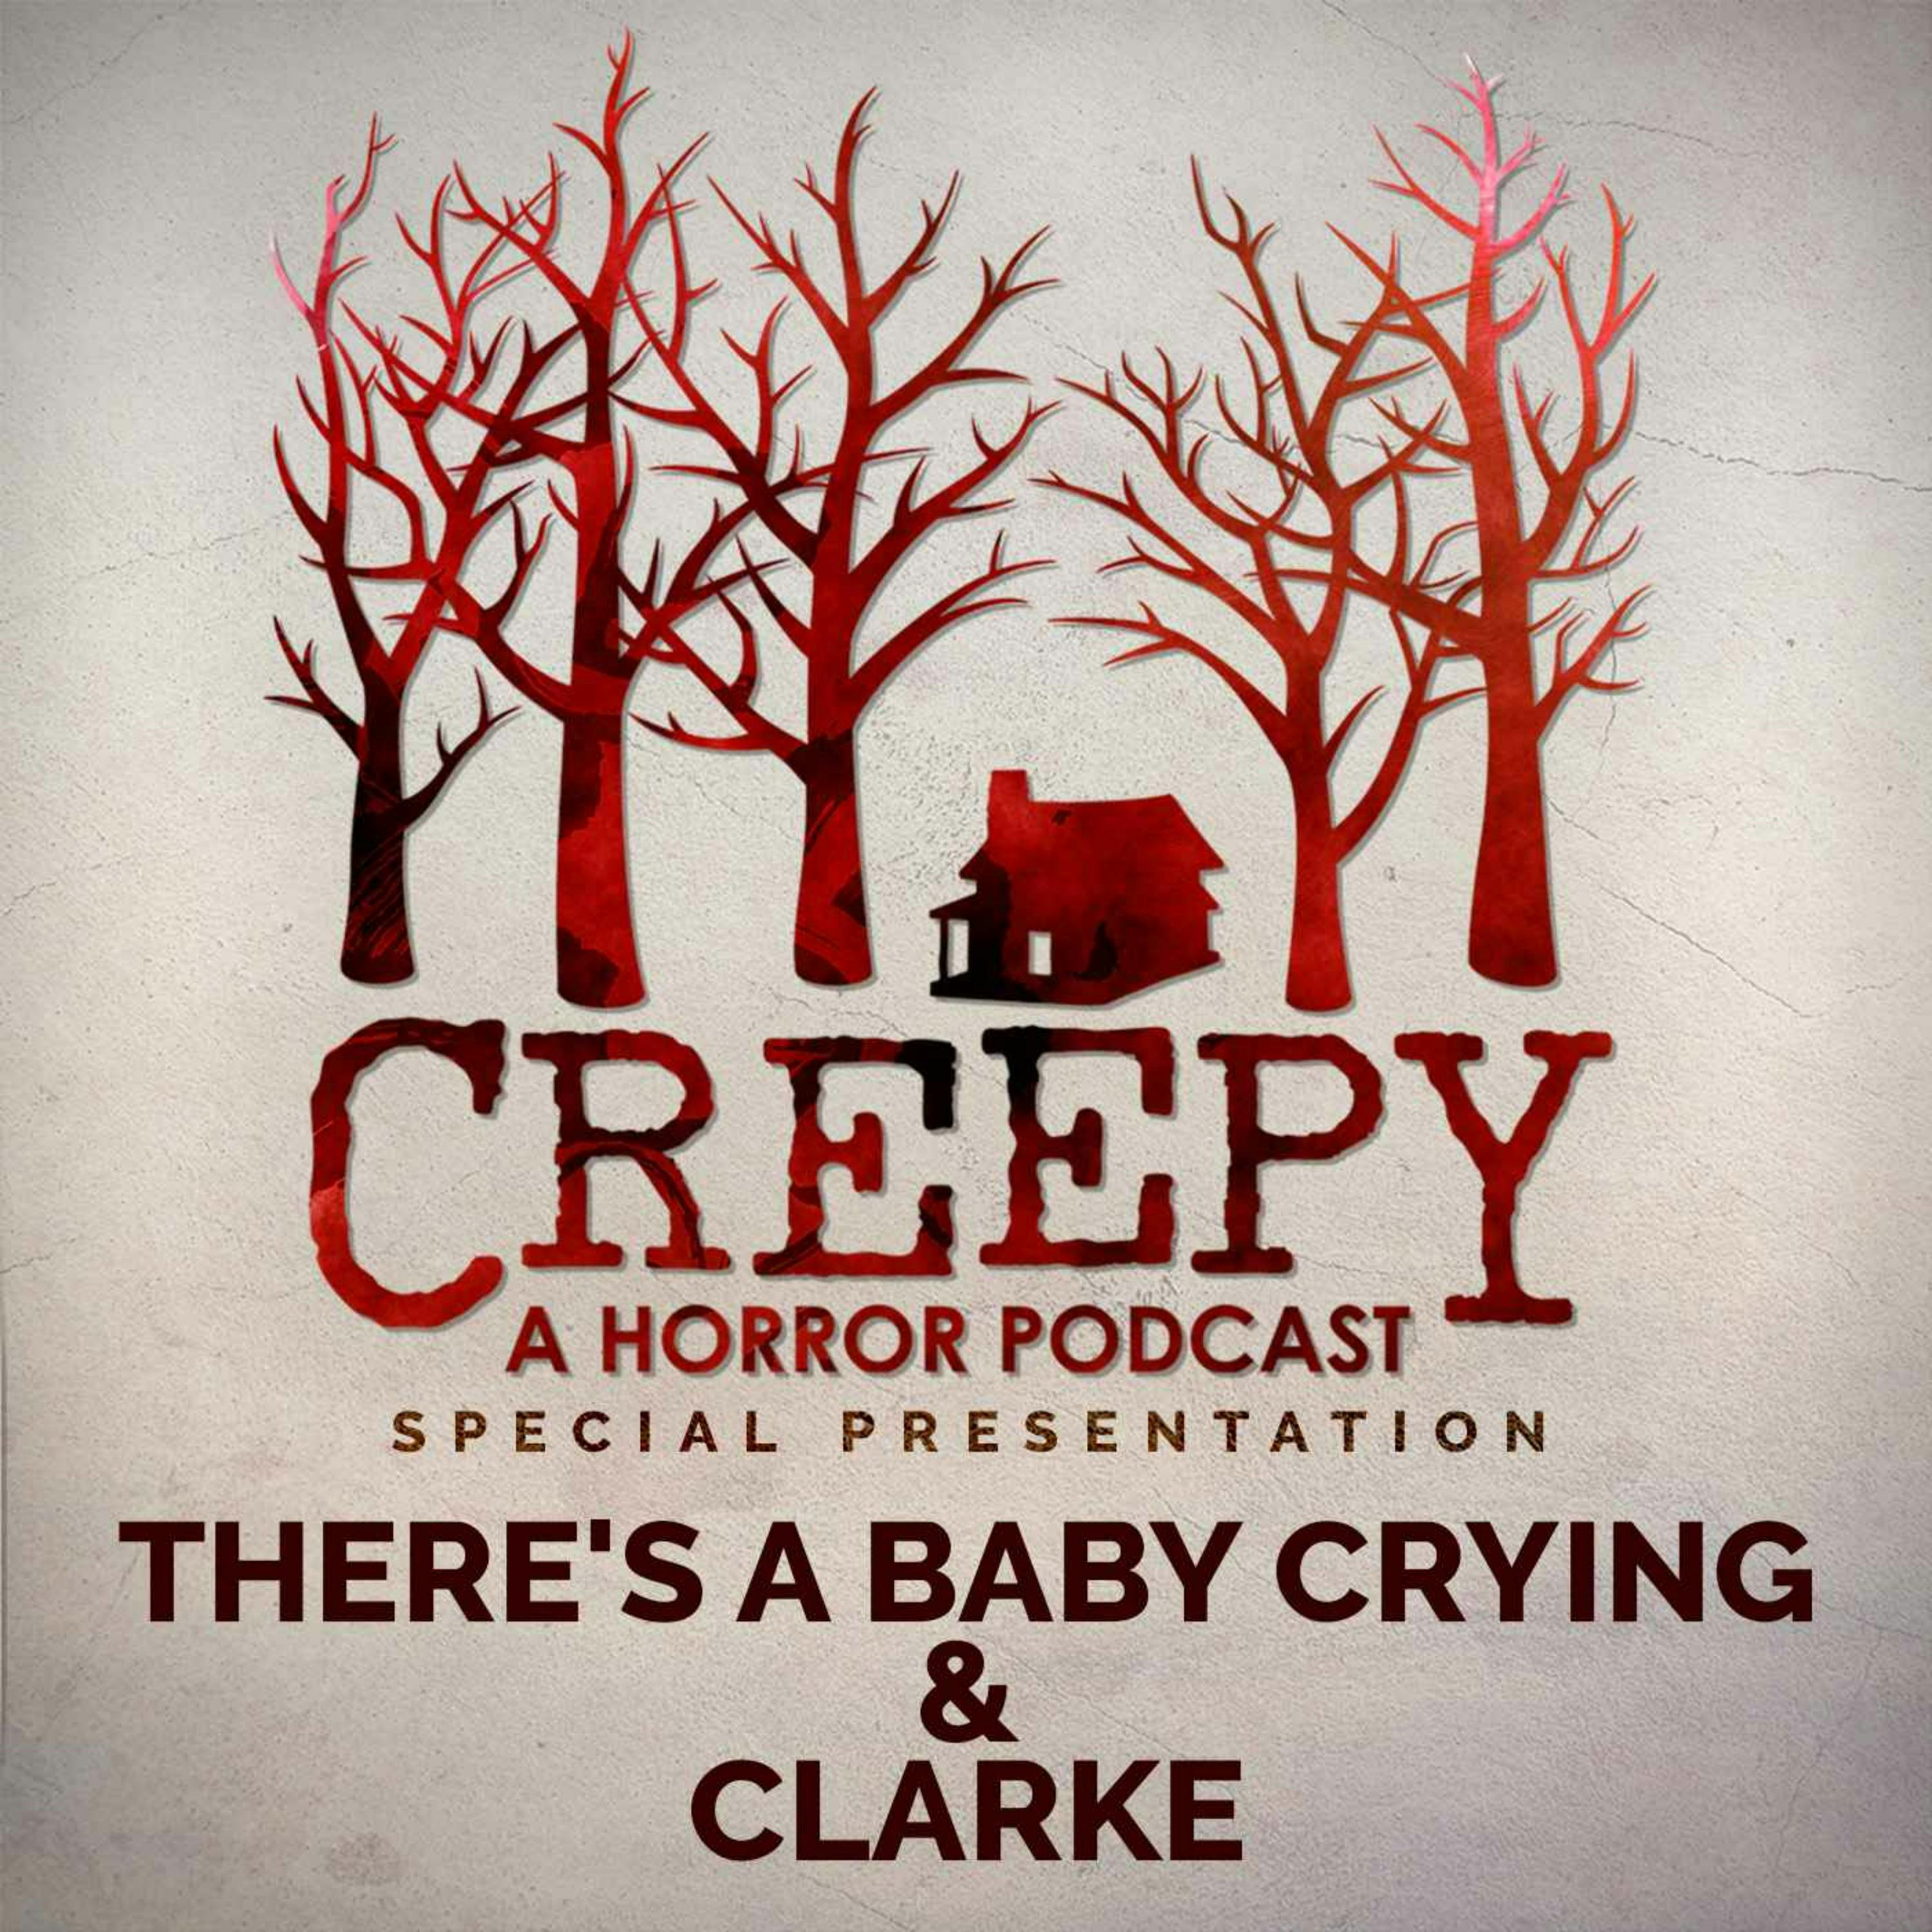 There’s A Baby Crying & Clarke